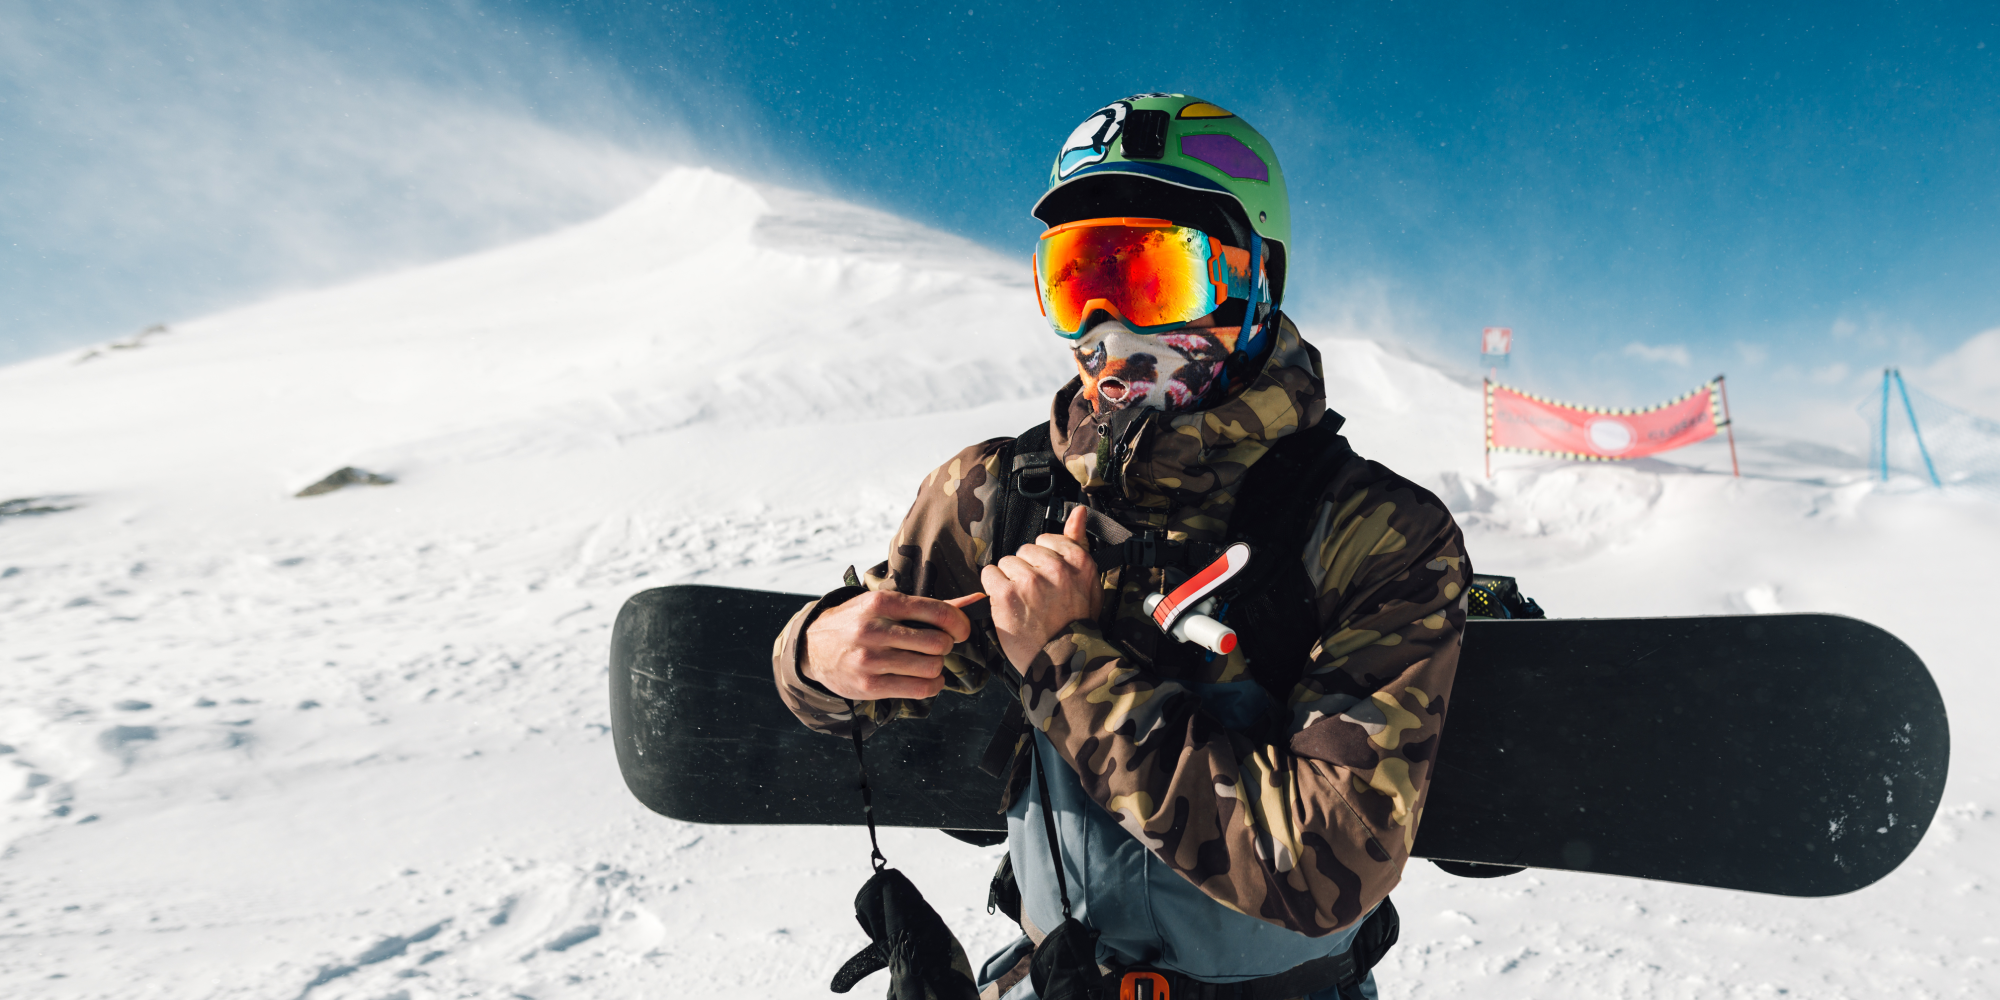 Welcome to ExpeditionXperience: Your Premier Destination for Equipment Management and Rentals for Active Recreation